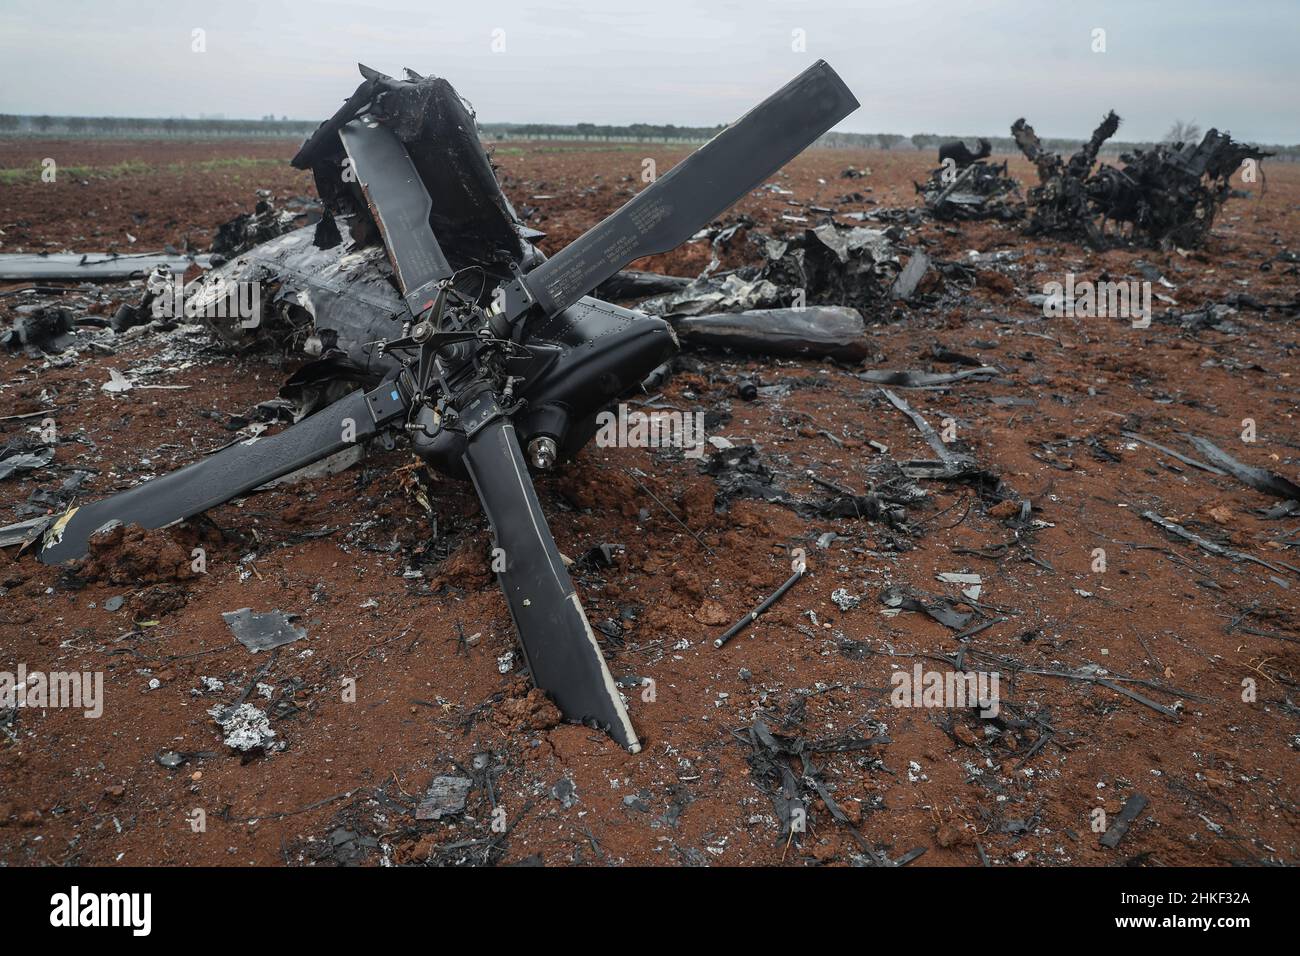 Afrin, Syria. 04th Feb, 2022. Wreckage of an American helicopter that was blown up by the US special forces after facing mechanical issues and was no longer operational. The MH-60 Black Hawk chopper took part in a raid in the town of Atmeh that resulted in the death of ISIS leader Abu Ibrahim al-Hashimi al-Qurayshi. American officials deny it crashed or was shot down. Credit: Anas Alkharboutli/dpa/Alamy Live News Stock Photo